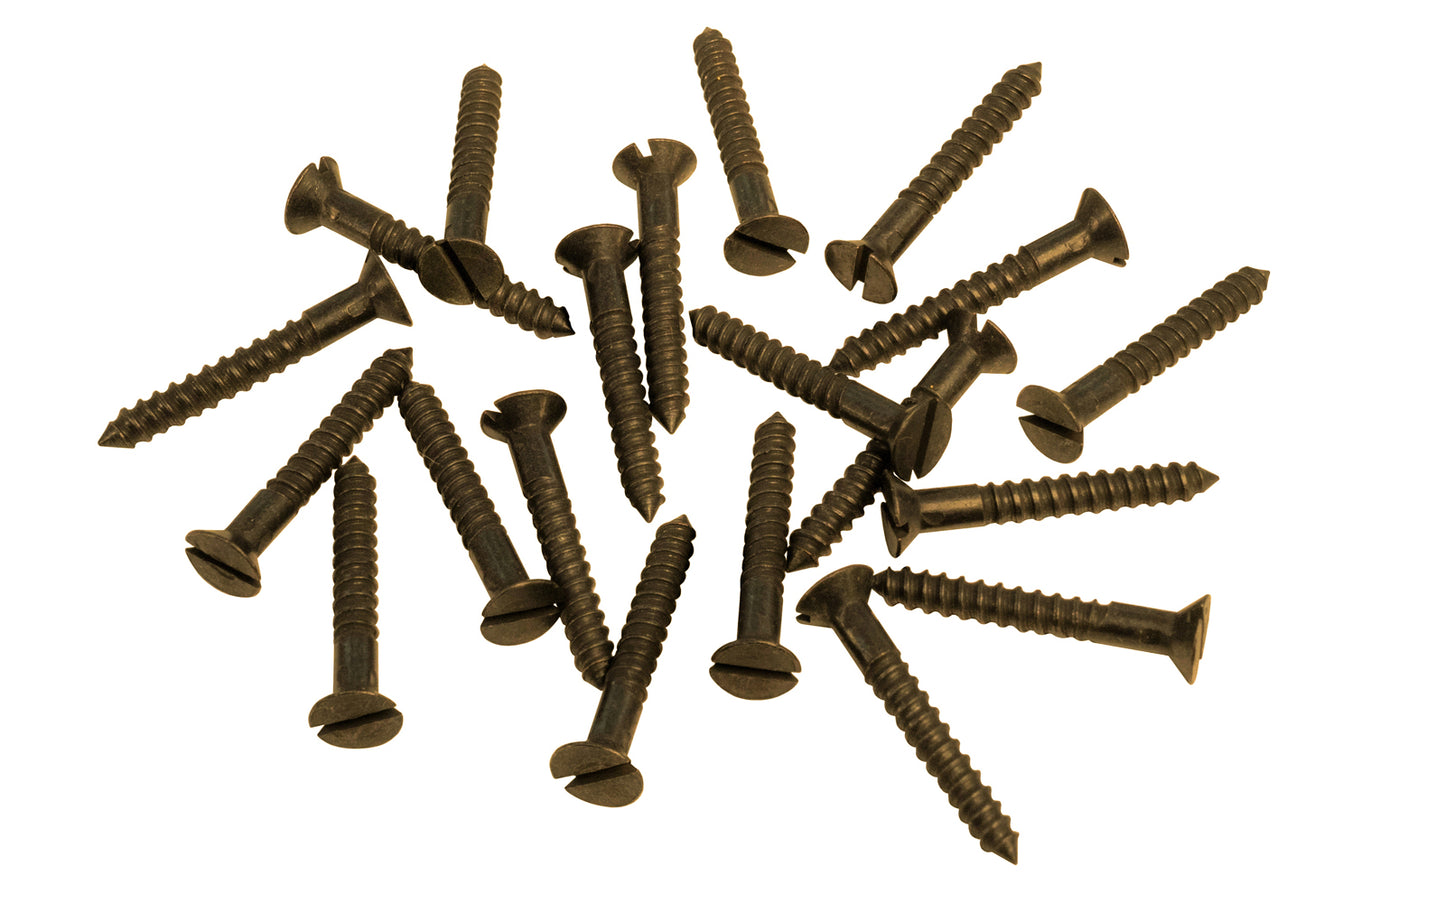 Solid Brass #7 x 1" Flat Head Slotted Wood Screws. Traditional & classic vintage-style countersunk wood screws. Sold as 20 pieces in a bag. Slot screws. Antique Brass Finish.